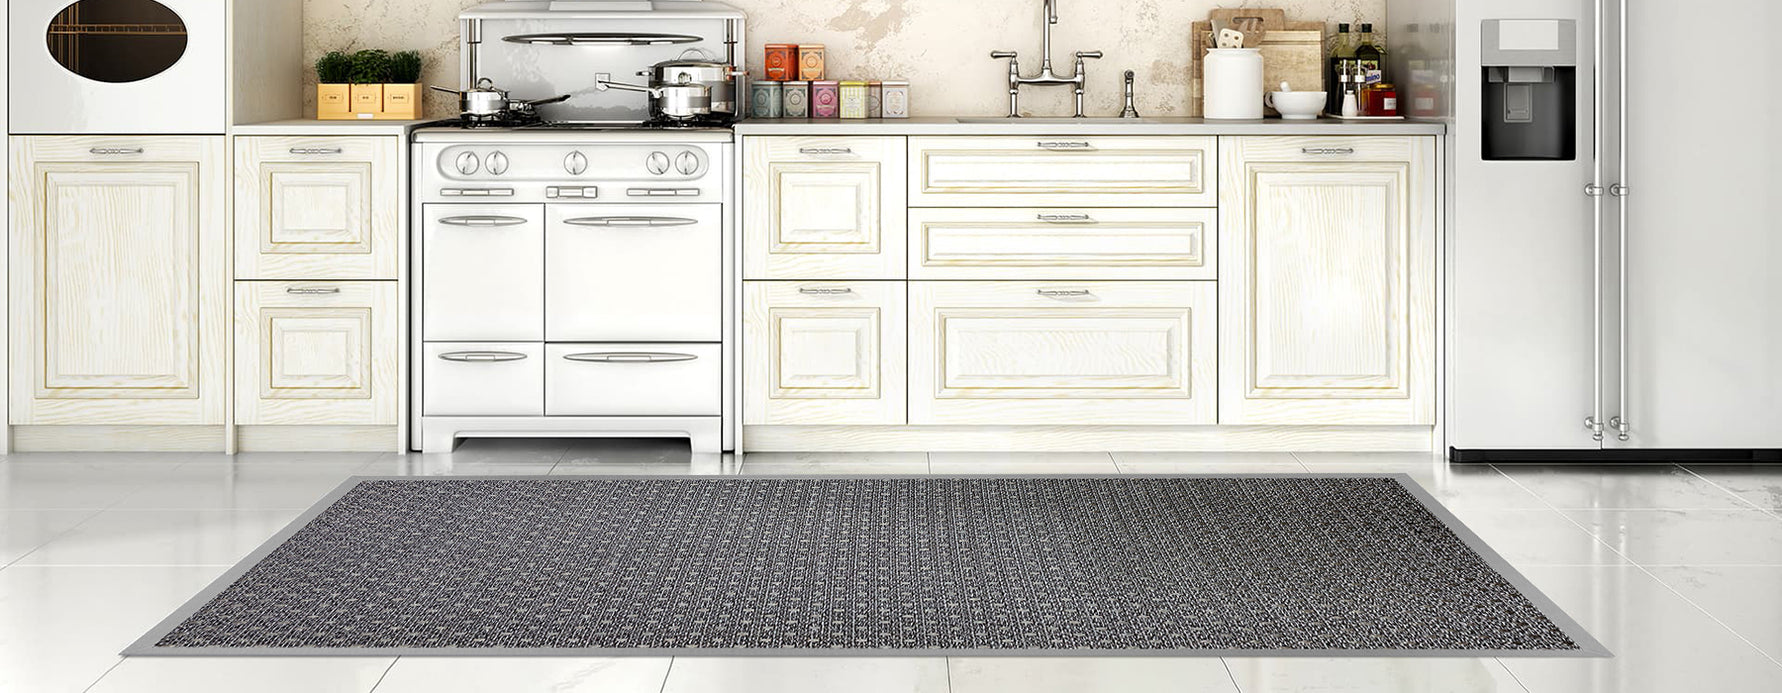 Matace: Removable Carpet Tiles, Washable Area Rugs and Door Mats ...